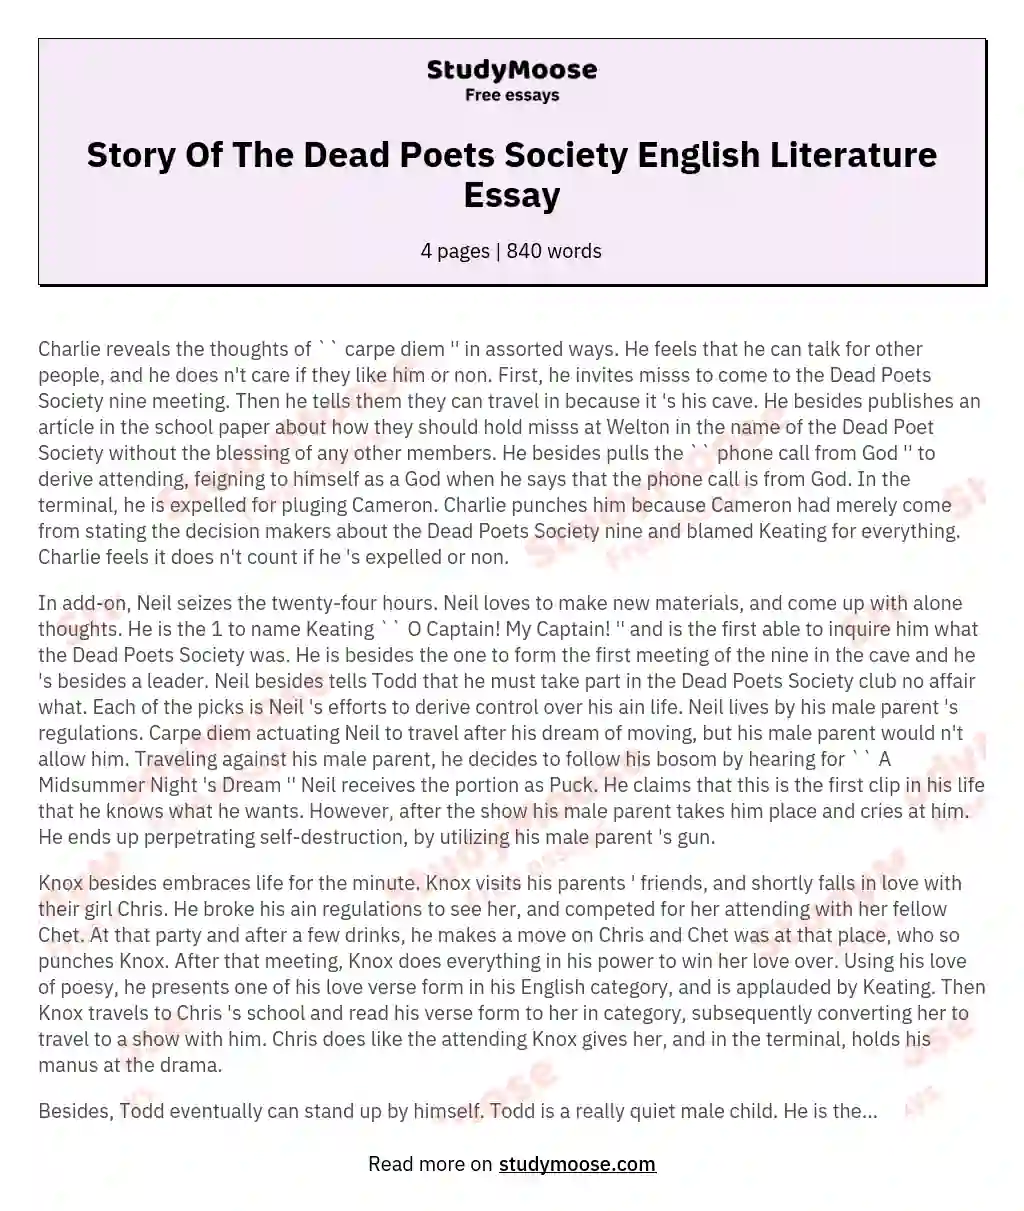 Story Of The Dead Poets Society English Literature Essay essay